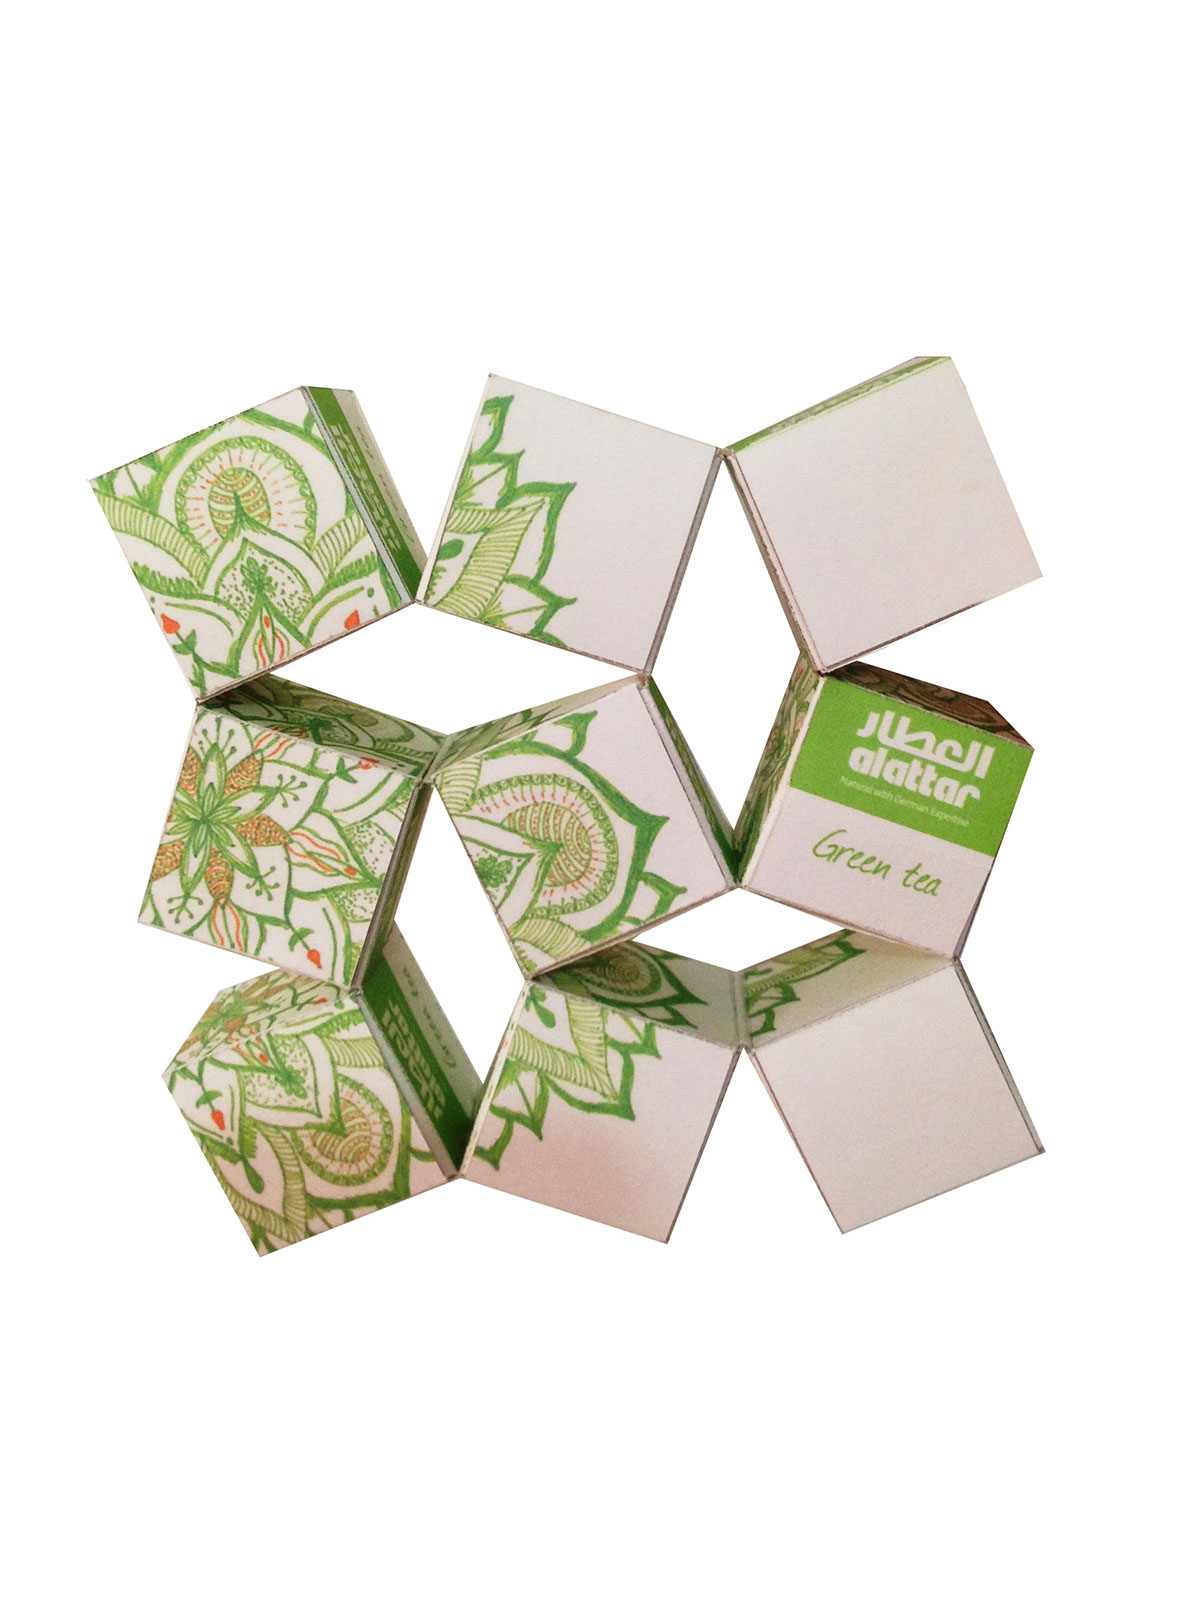 graphic design  Packaging Fun structural packaging